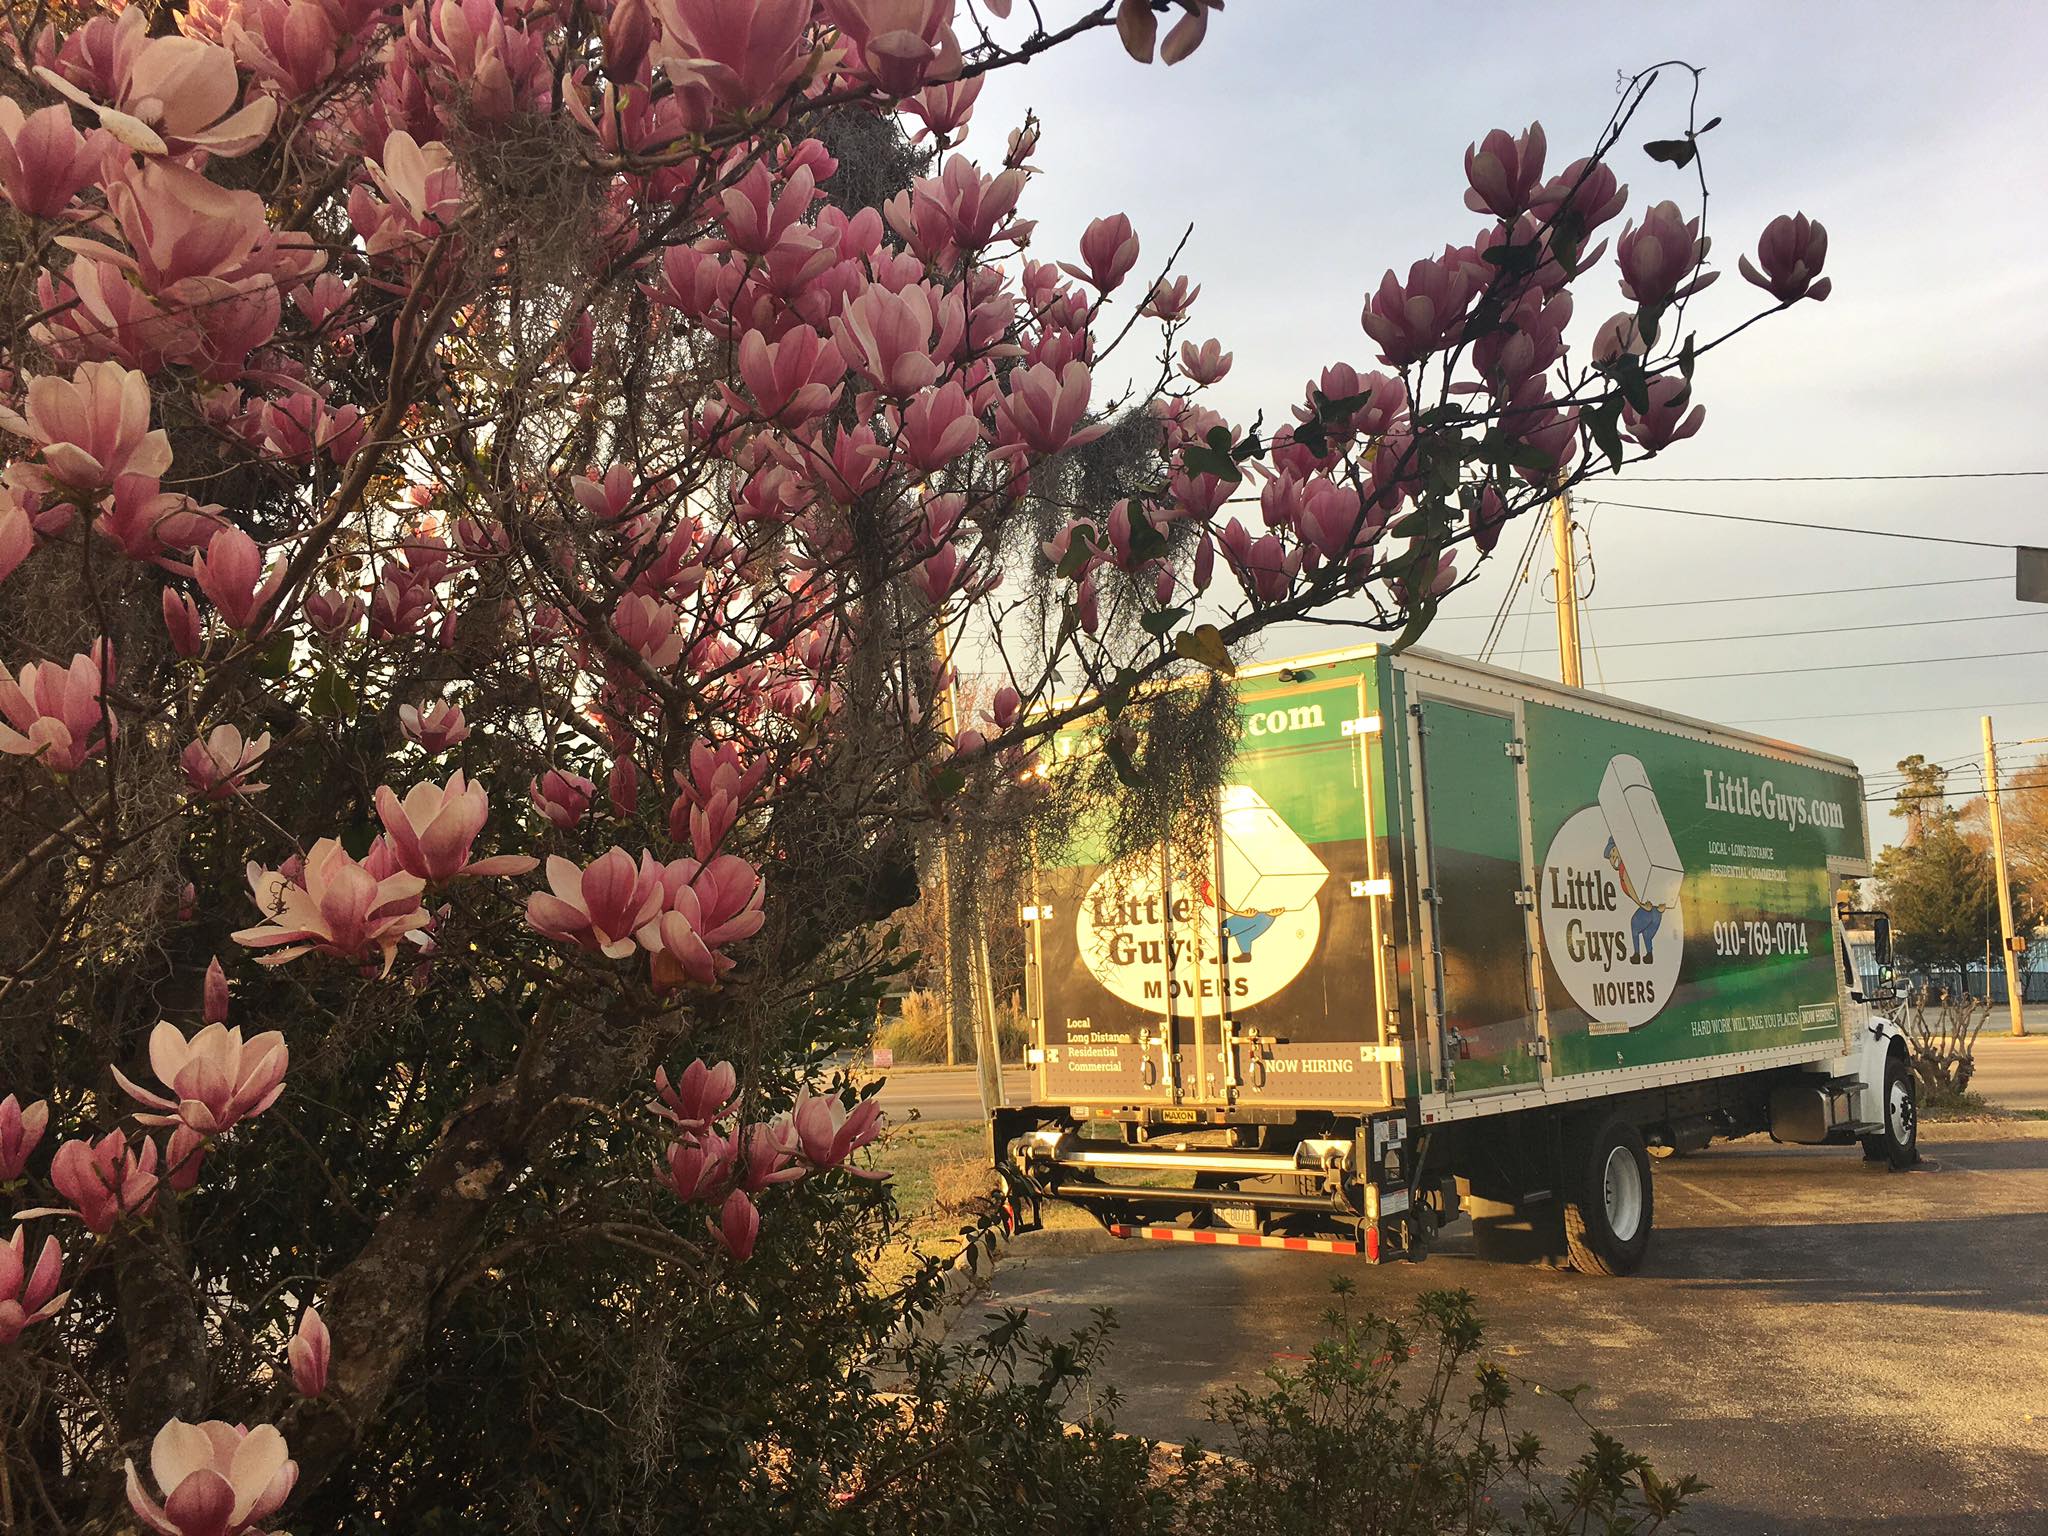 A beautiful tree covered in pink flowers takes up the left half of the image, and a Little Guys truck is parked on the right half